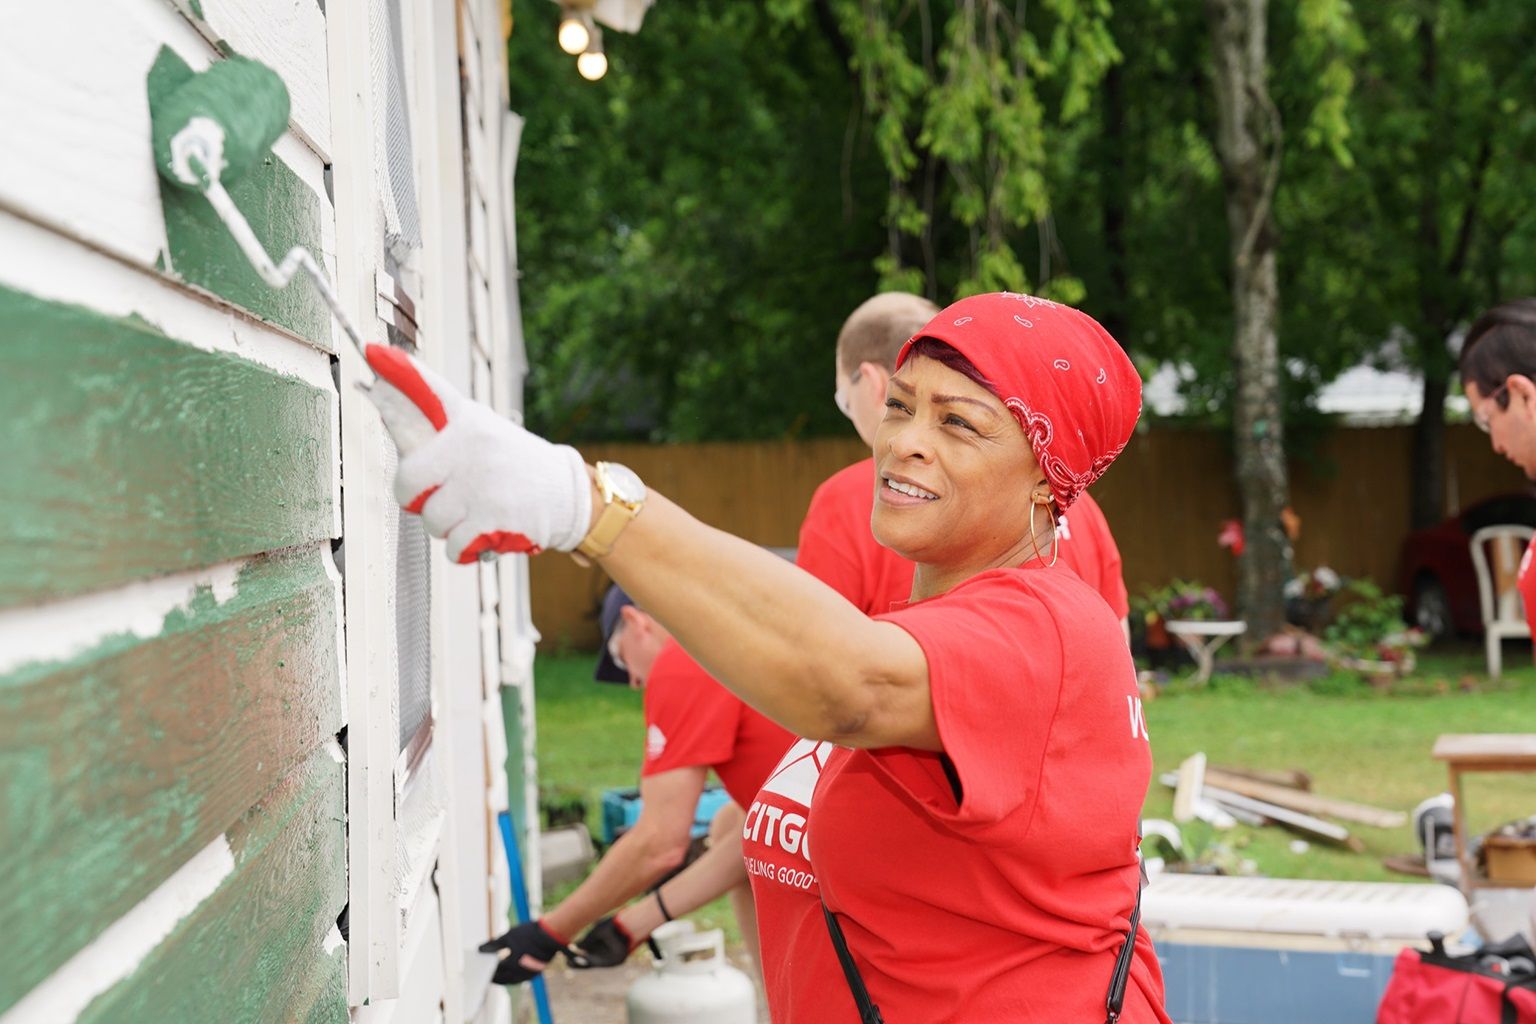 Citgo employee helping paint at a community event